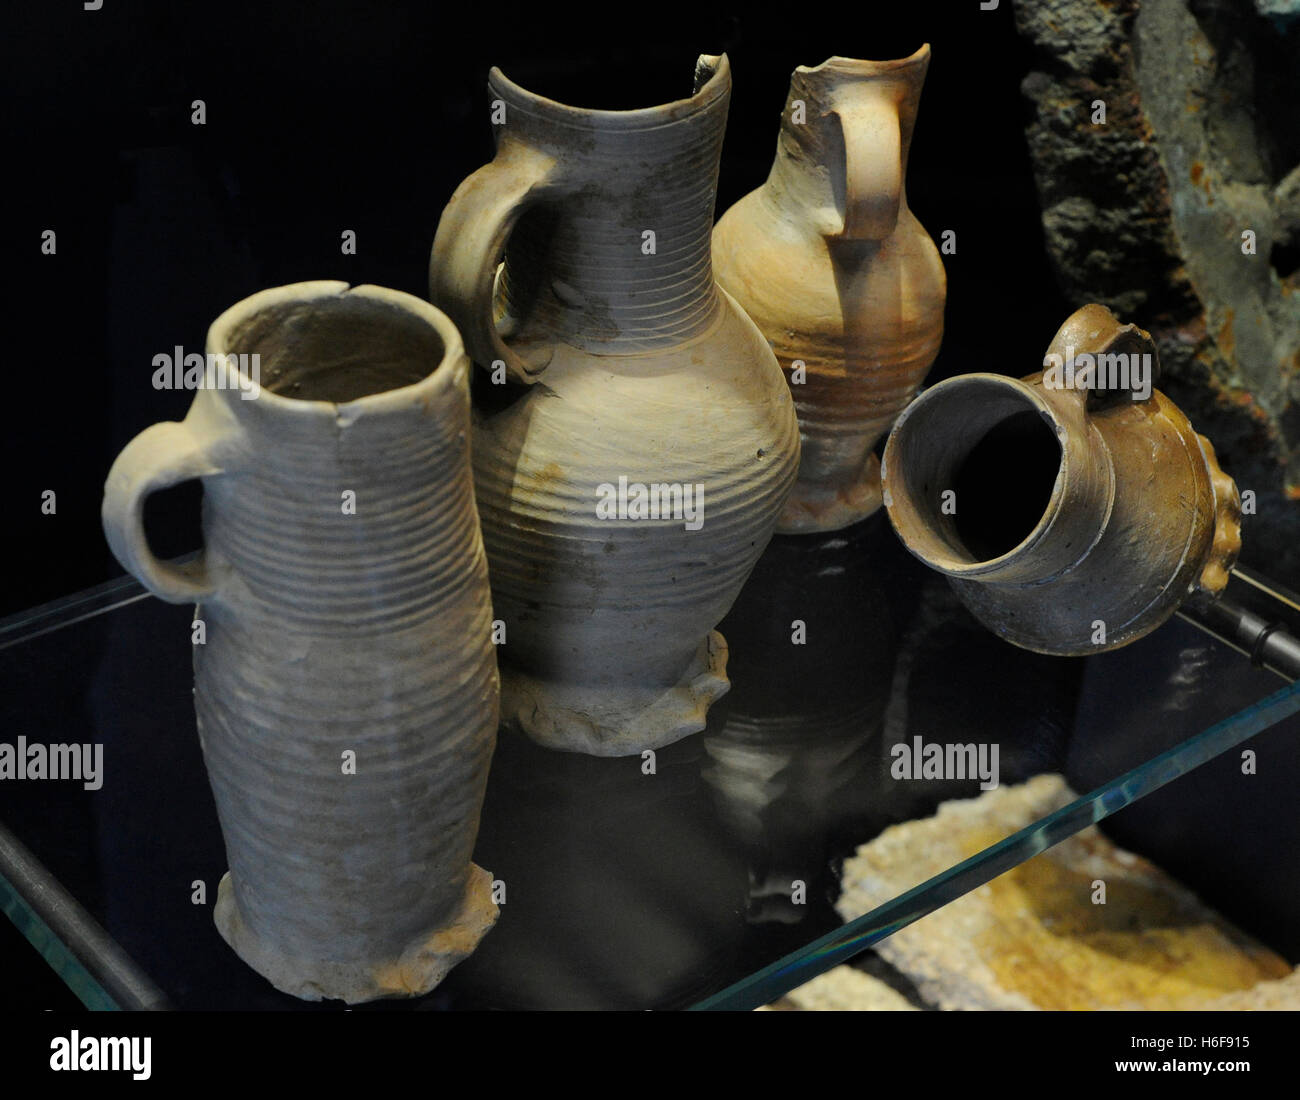 Mugs from the Middle Ages. From German-made mugs were found in a natural harbour in Southern Norway. Norwegian Maritime Museum. Oslo. Norway. Stock Photo